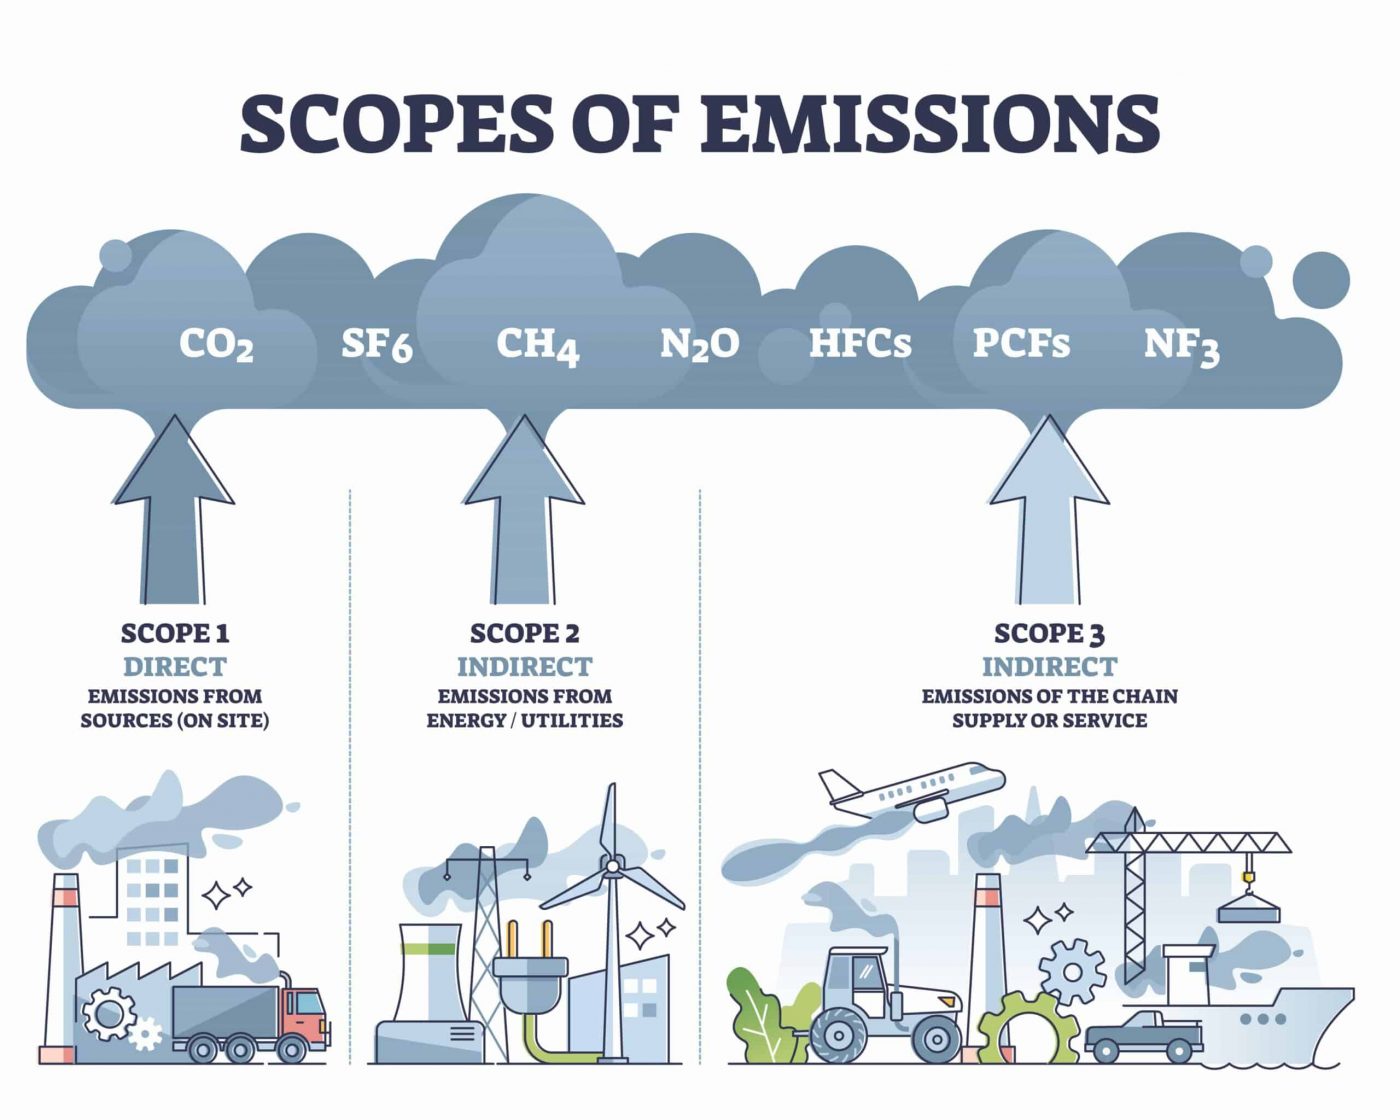 Different types of scopes of emissions 